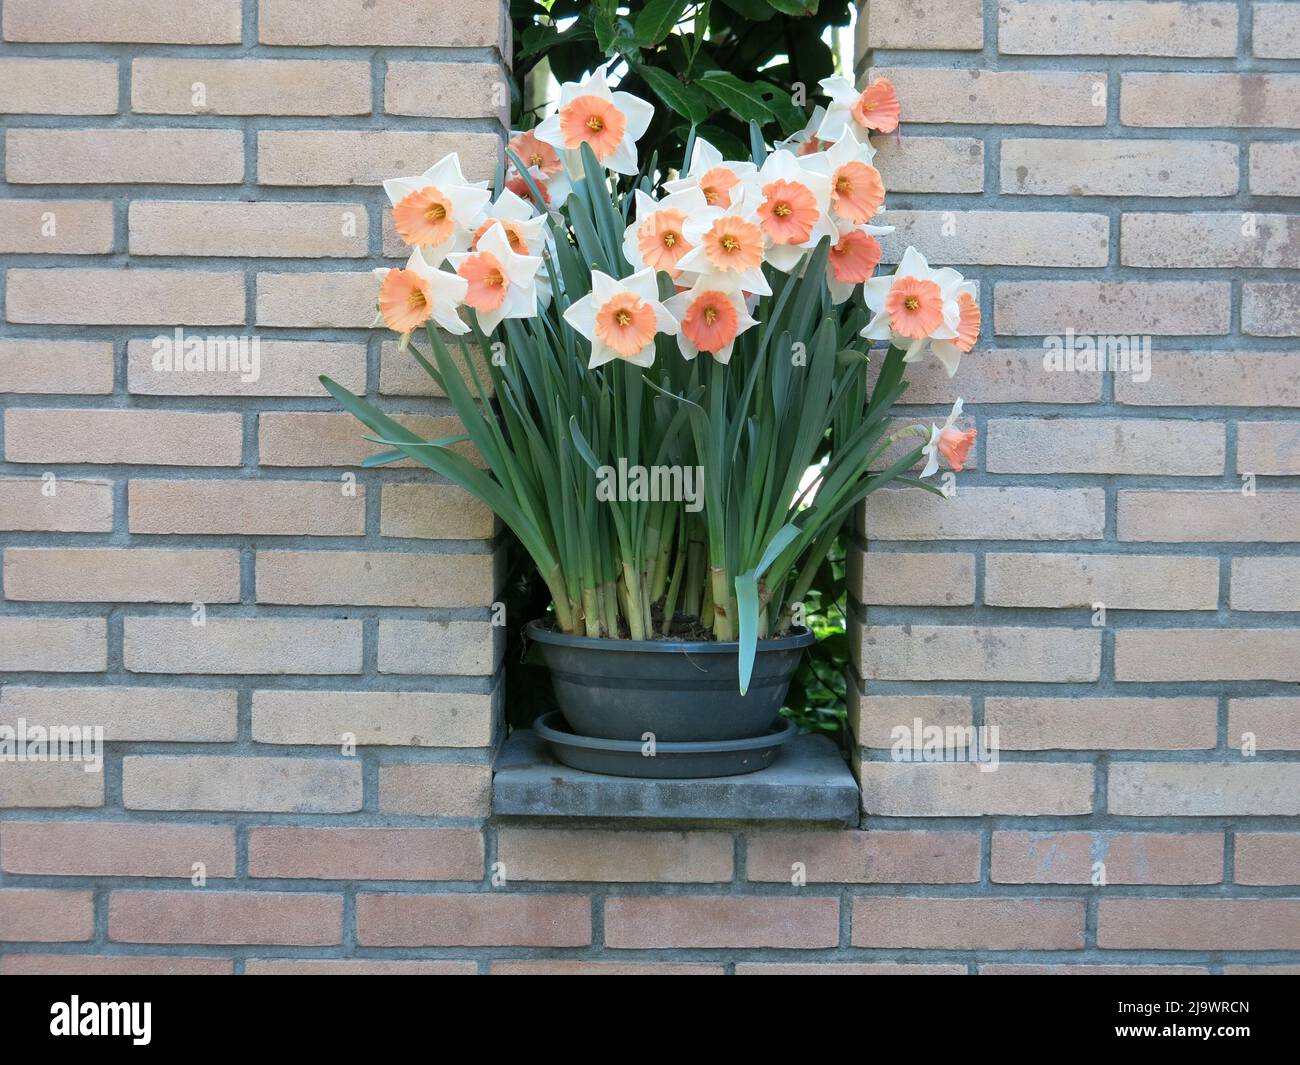 Pot of pale spring daffodils in an opening in a brick wall, artfully arranged leaving copy space for editorial text. Stock Photo